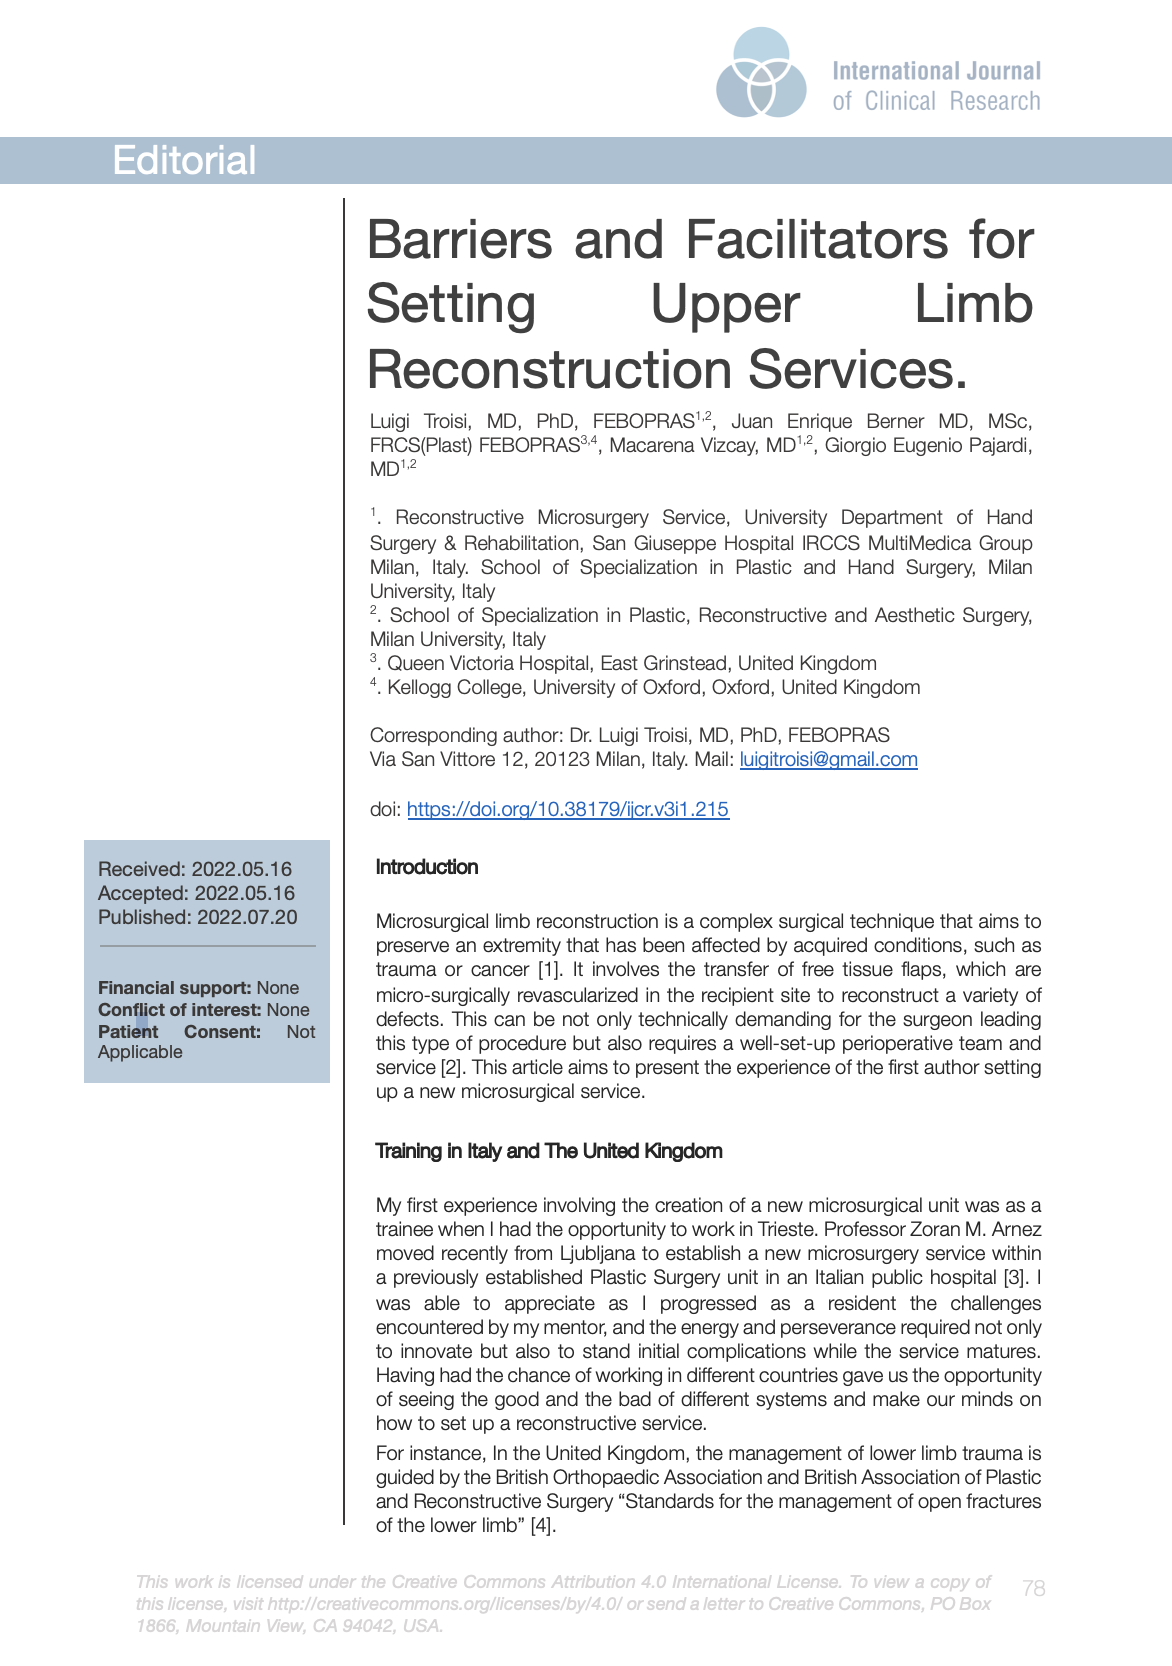 Barriers and Facilitators for Setting Upper Limb Reconstruction Services